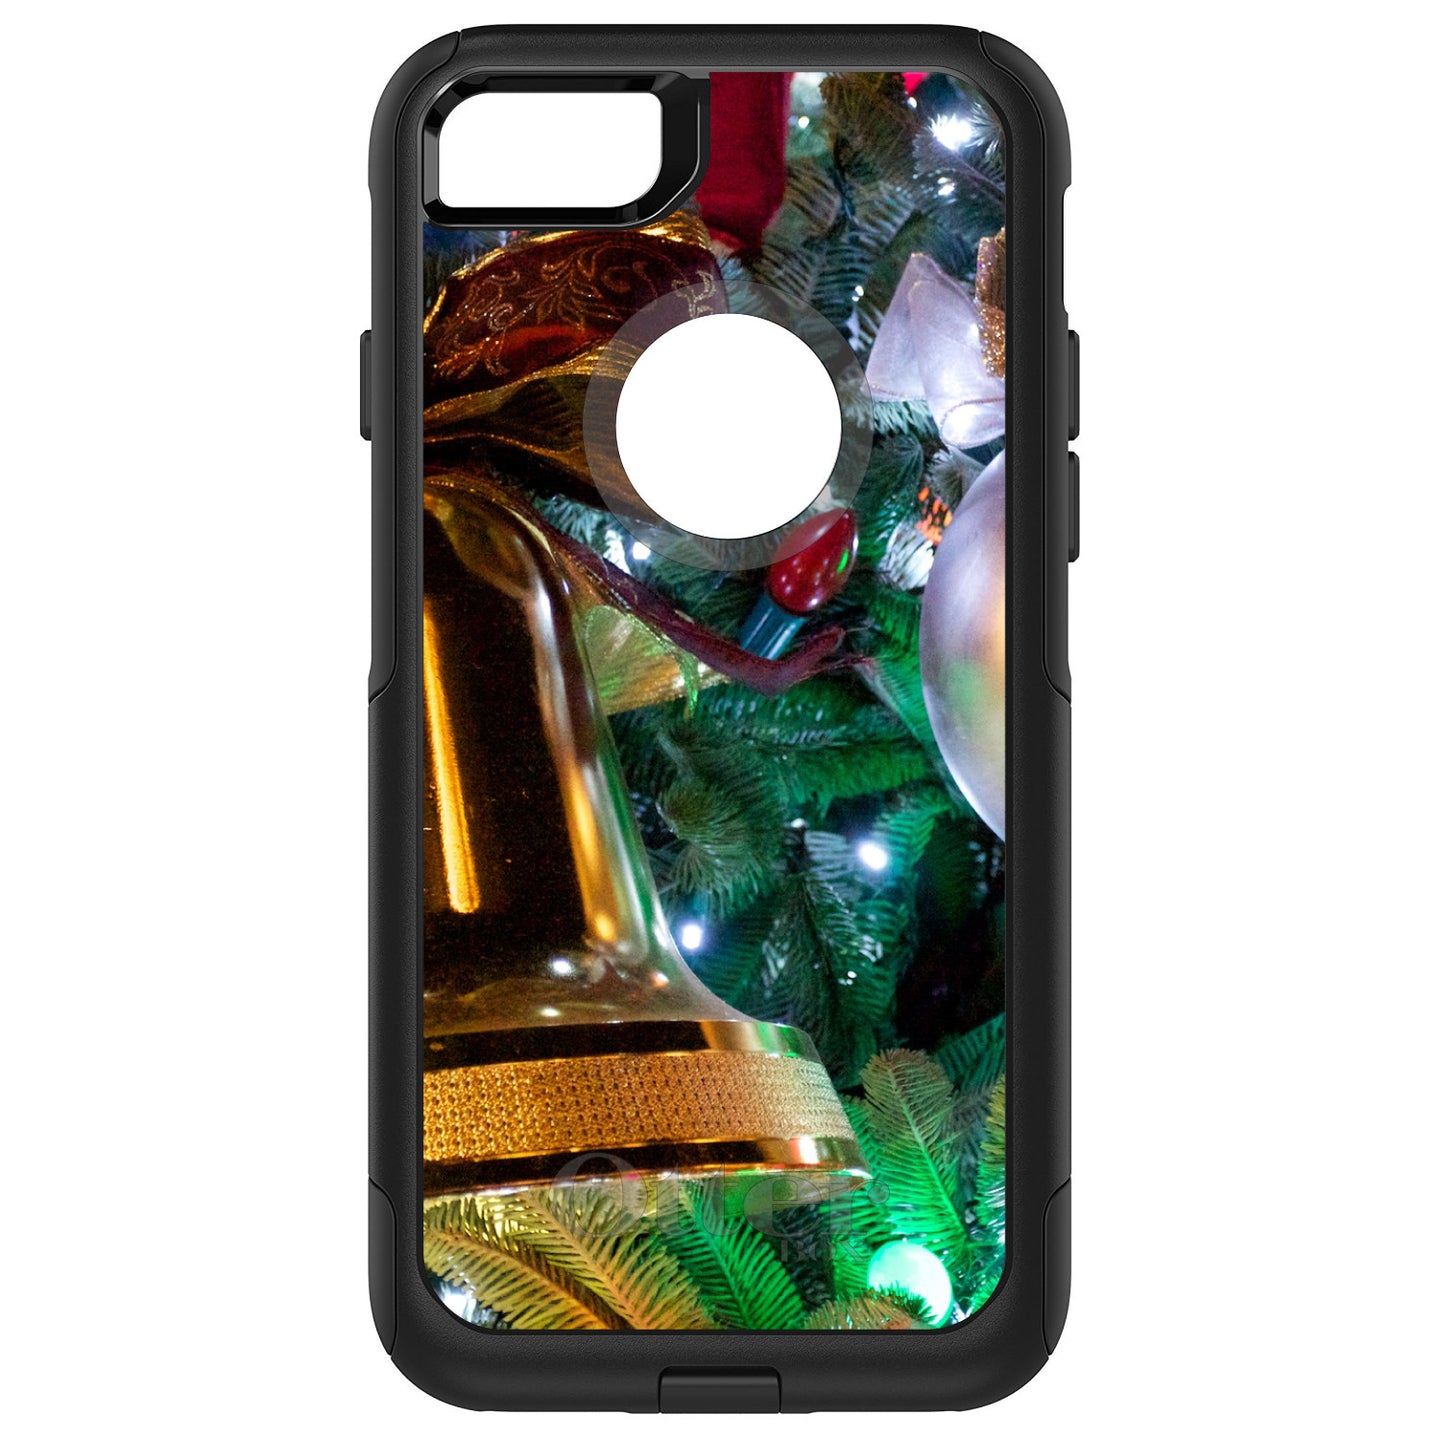 DistinctInk™ OtterBox Commuter Series Case for Apple iPhone or Samsung Galaxy - Christmas Ornaments Bell